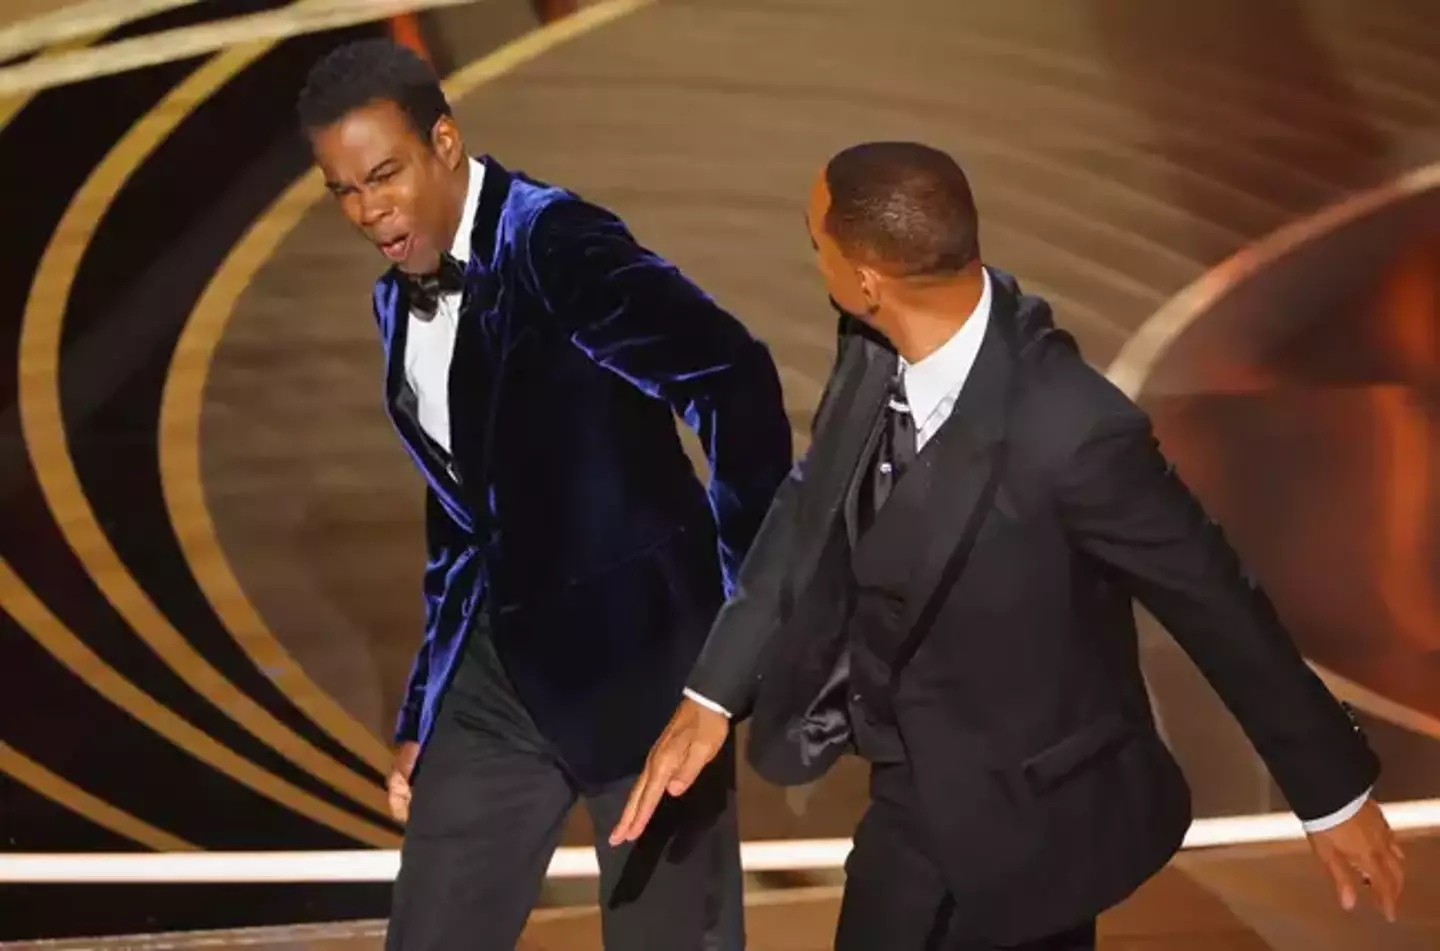 It's been nearly a year since Will Smith slapped Chris Rock at the Oscars.